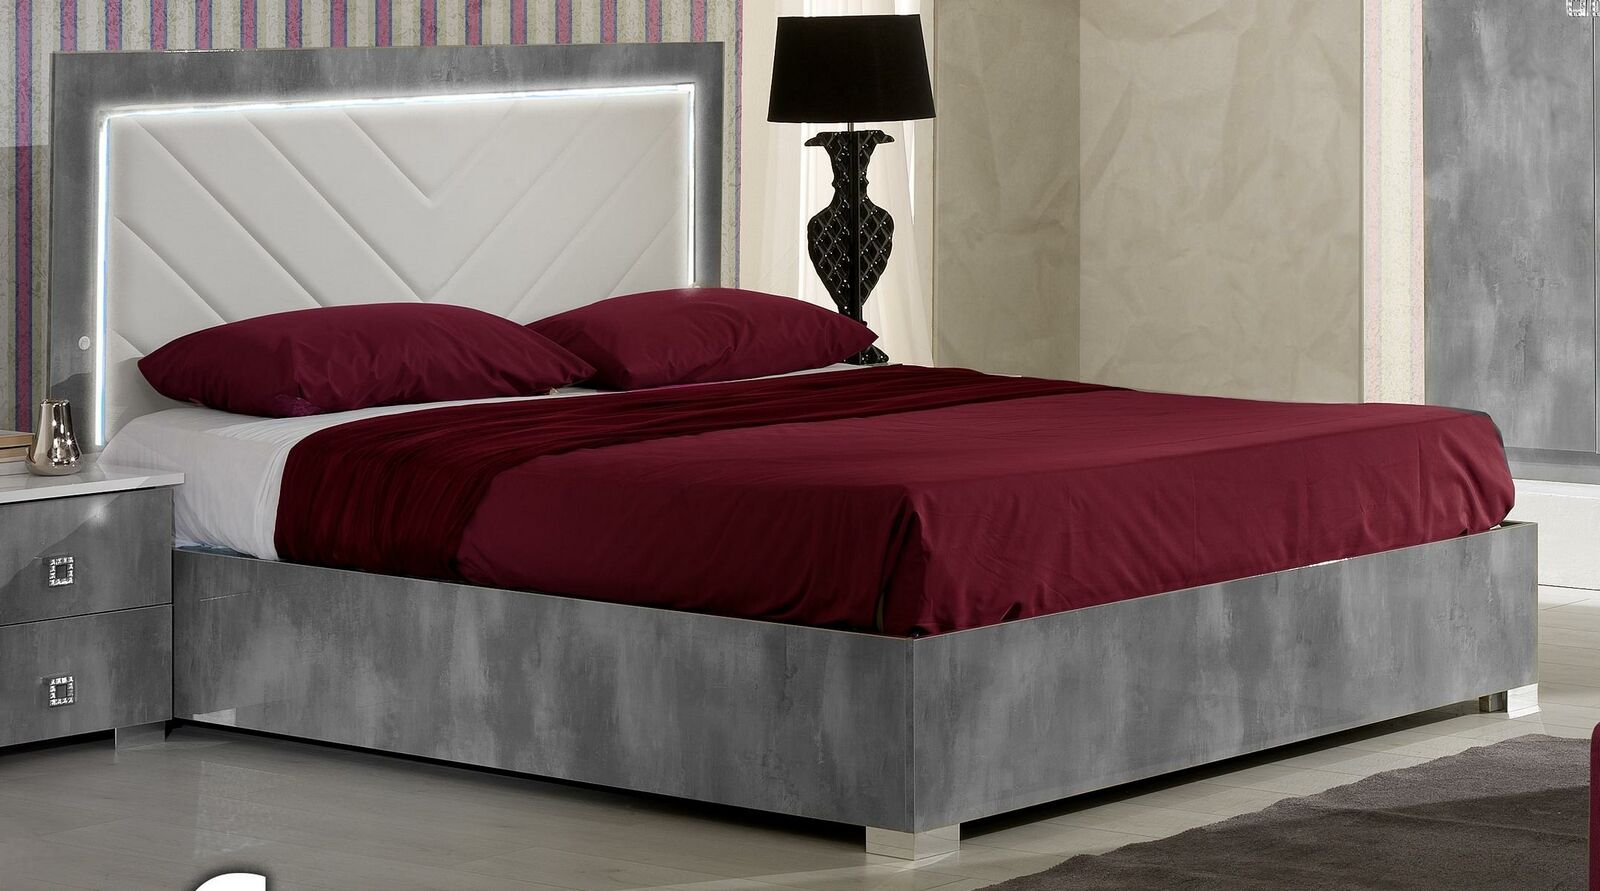 Modern style designer massive leather double bed made of real wooden frame with LED light